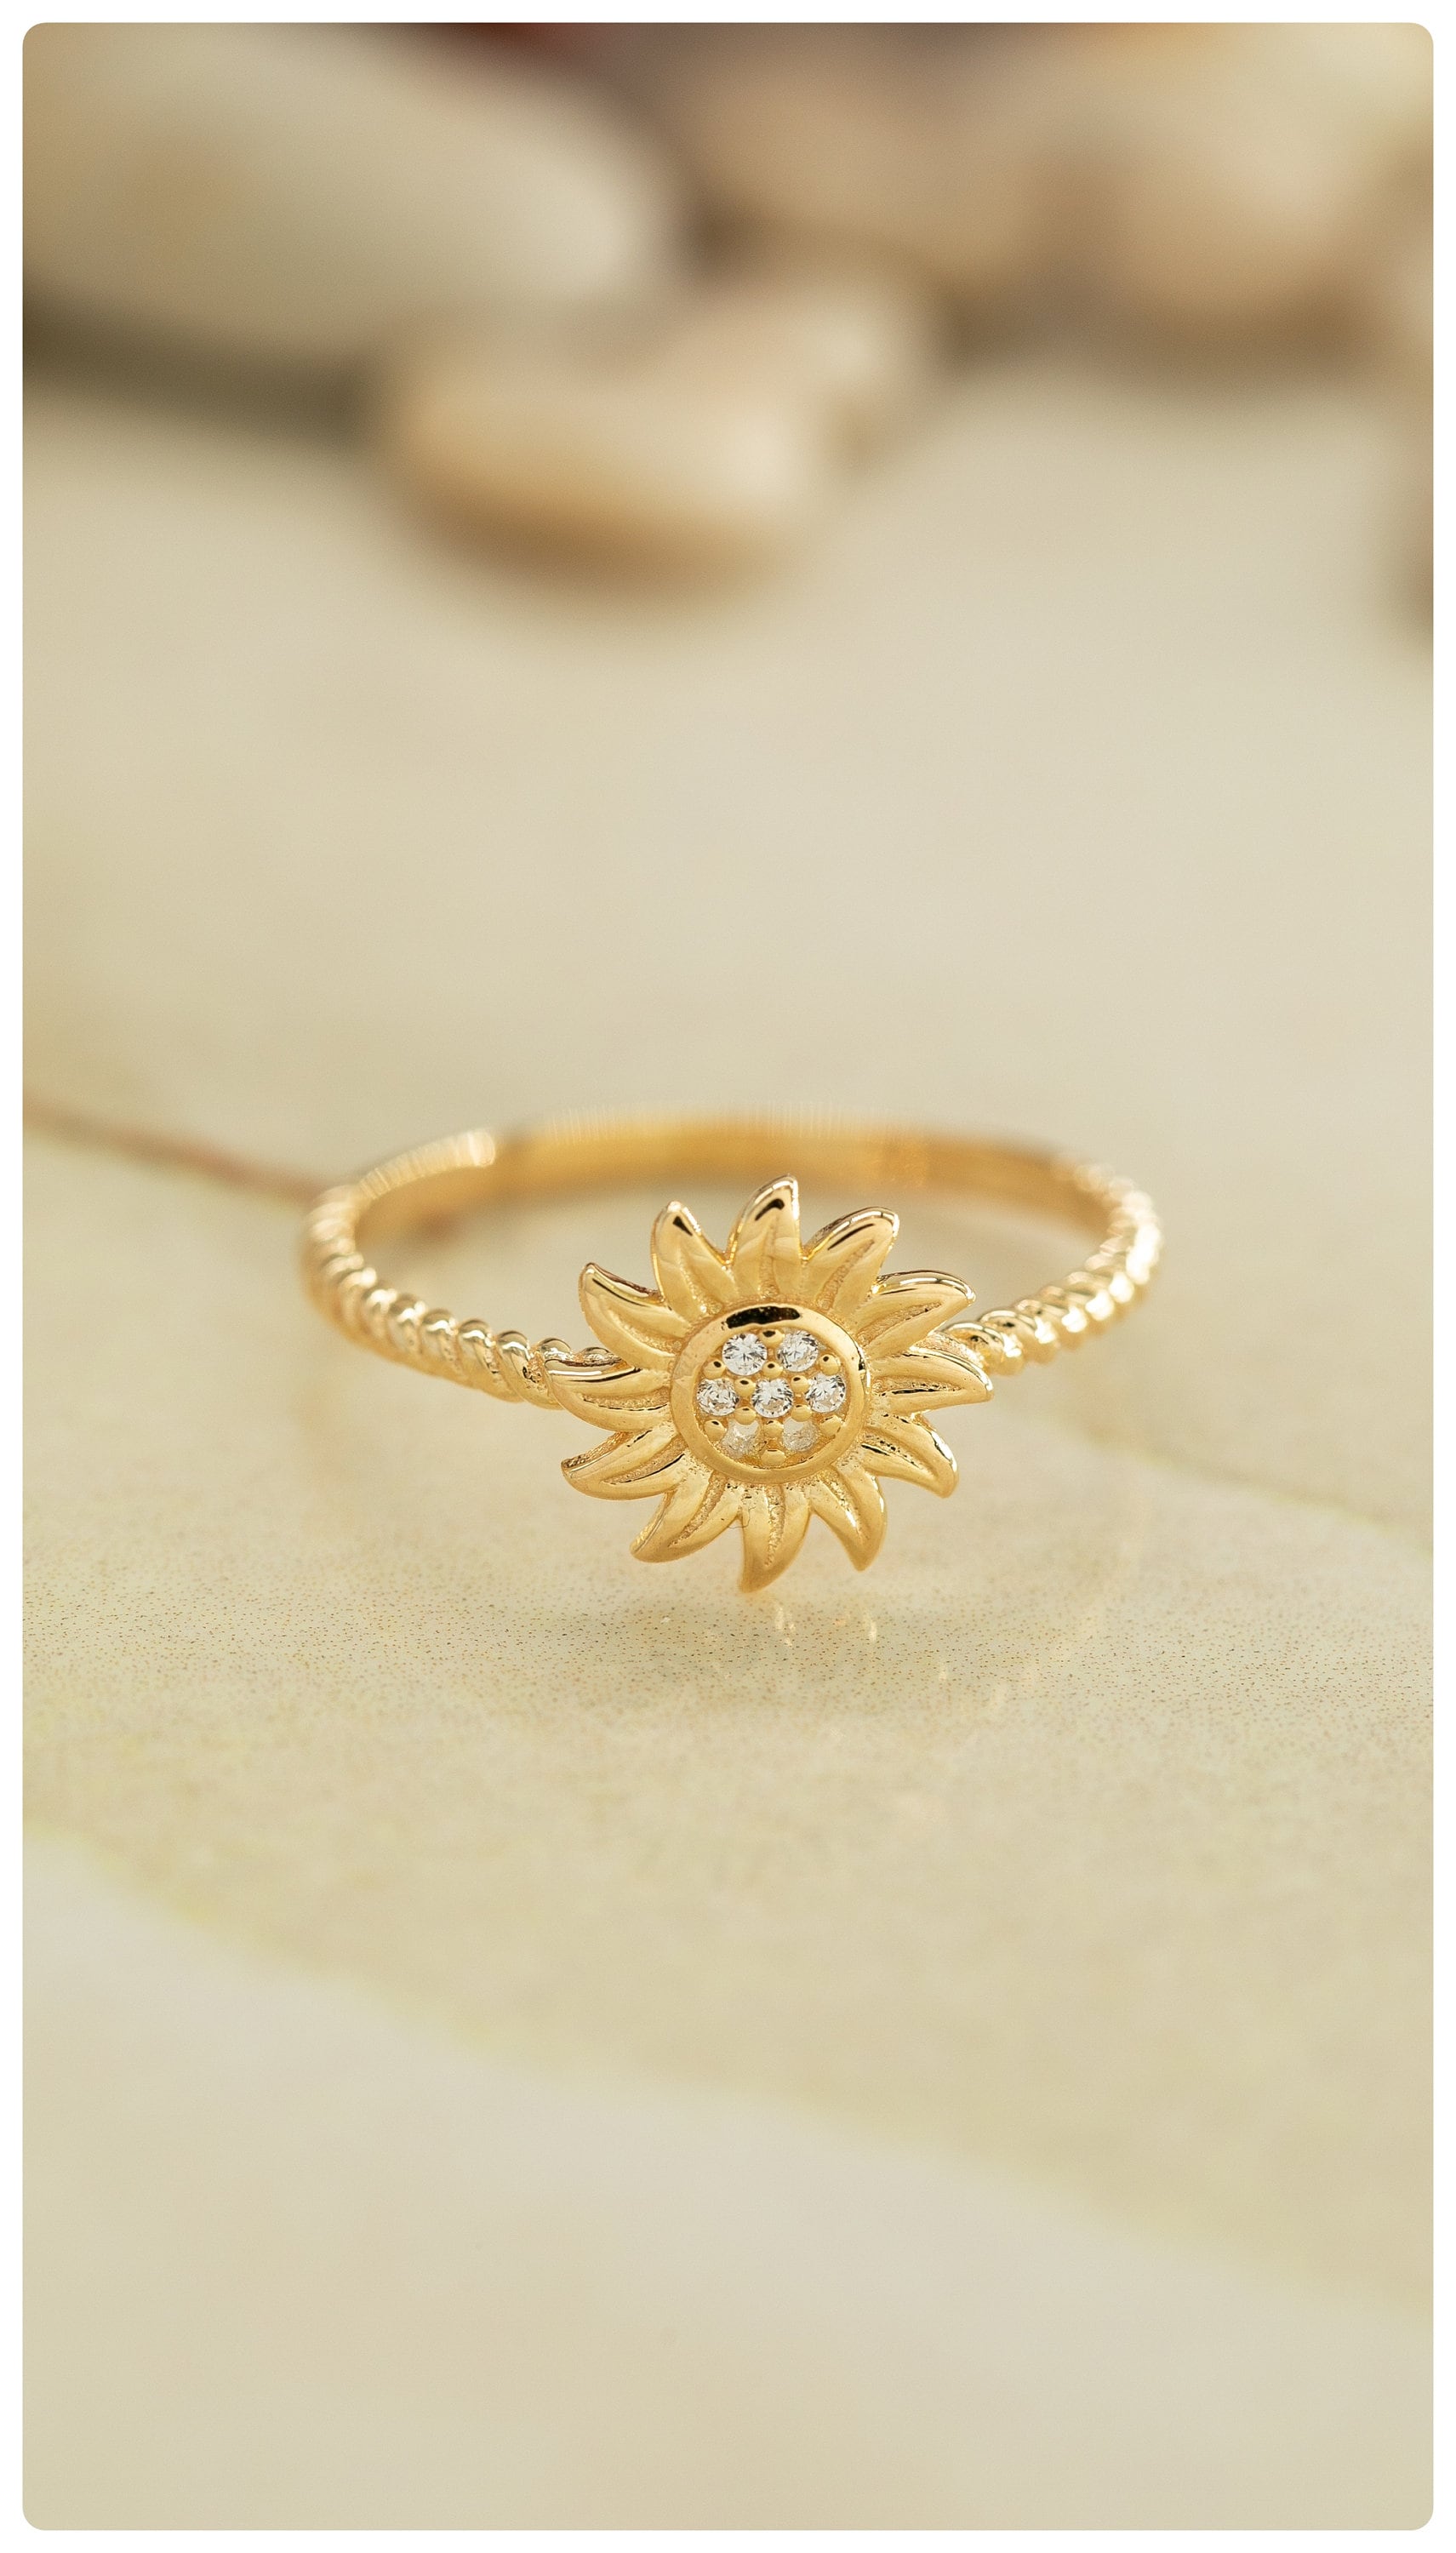 14K Elegant Gold Sunflower Ring 925 Sterling Silver Handmade Floral Jewelry Handcrafted Botanical Jewelry Meaningful Gift for Her